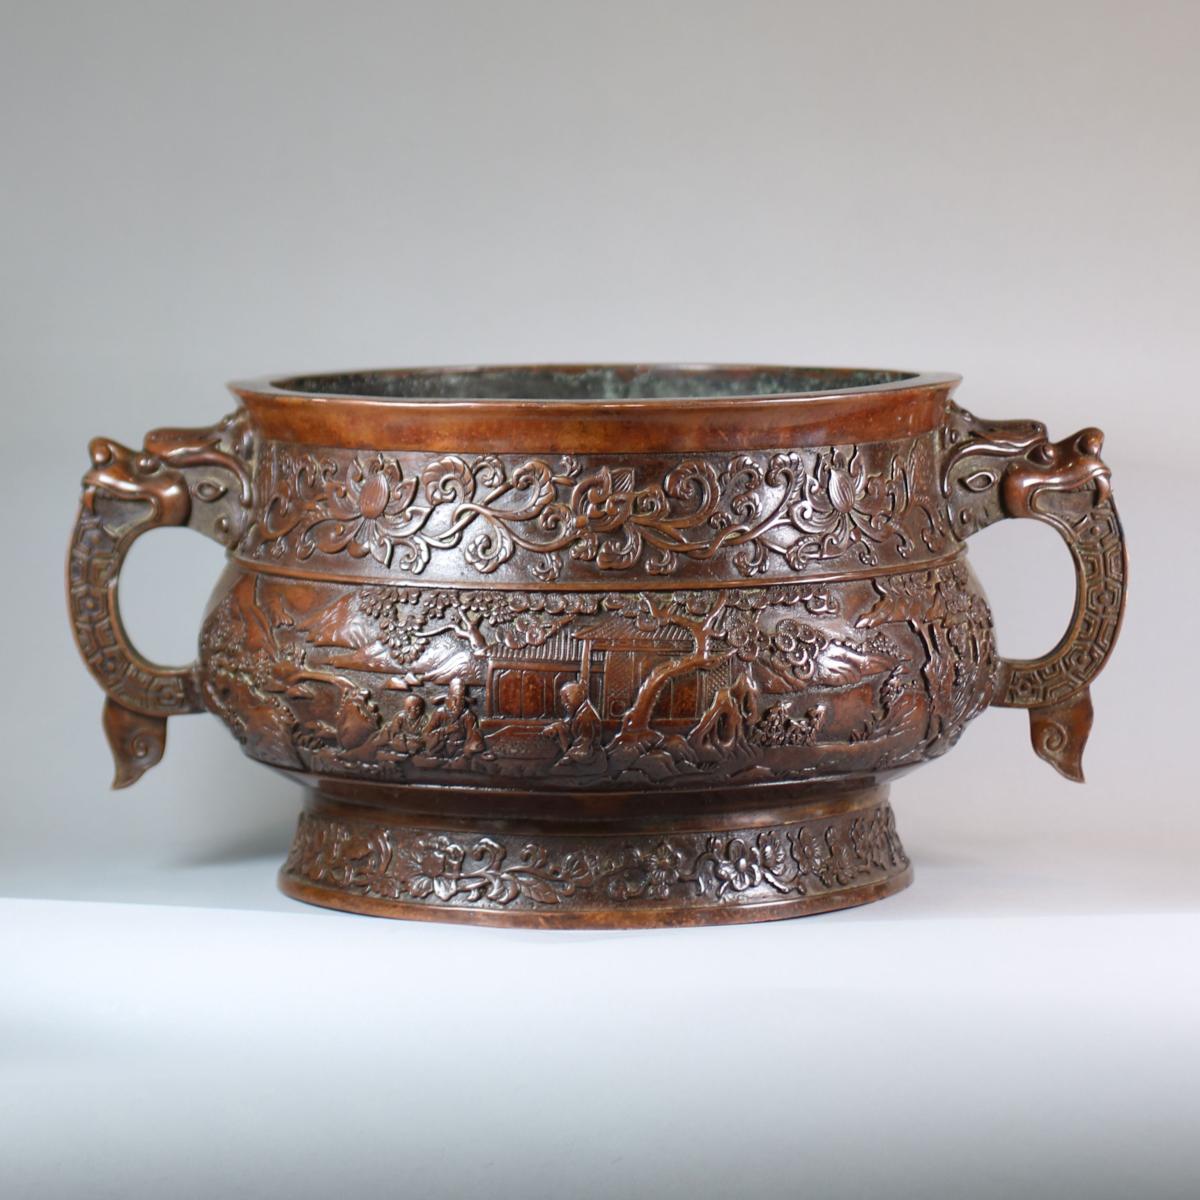 Extremely large Chinese bronze censer